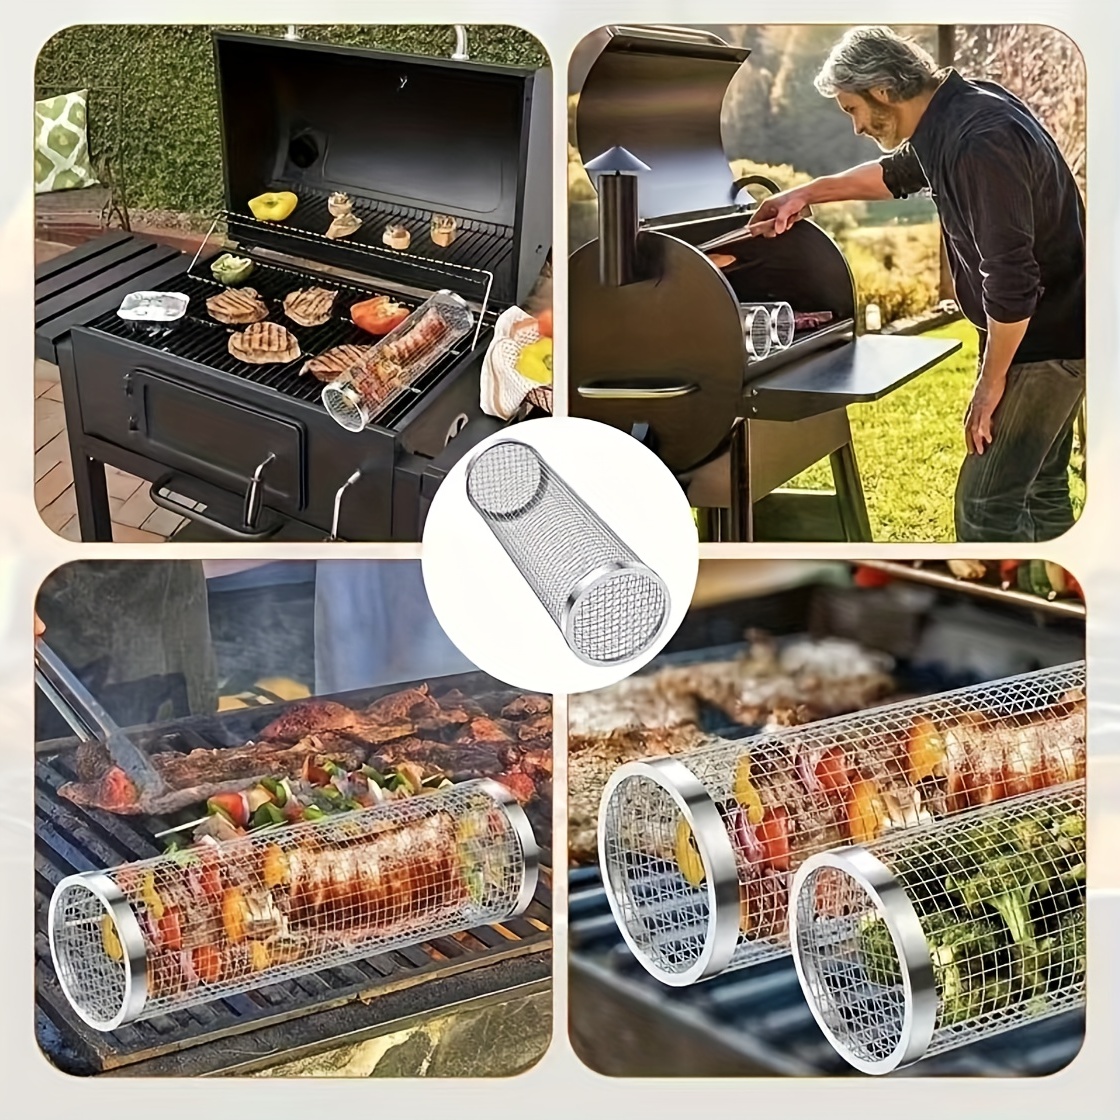 BBQ Accessories - The Best Grilling Accessories and Gifts for Dad 